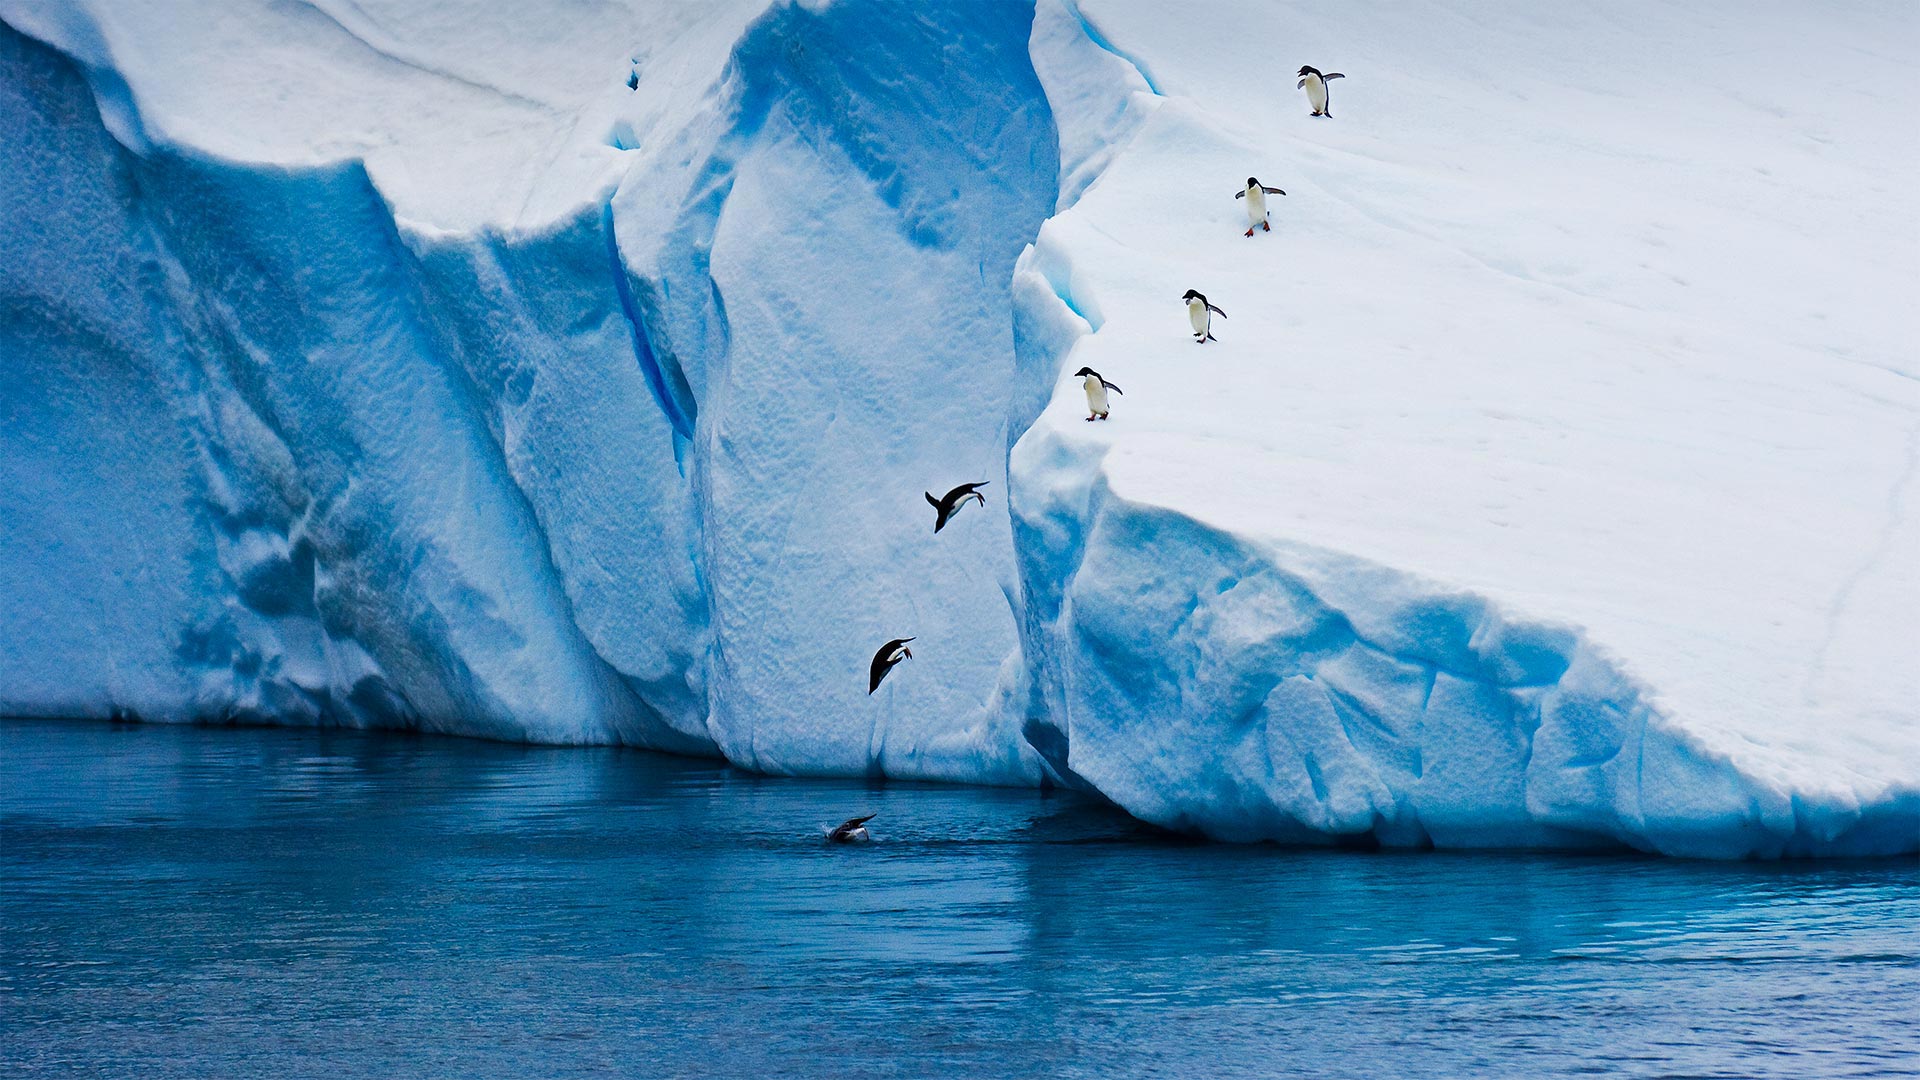 Adélie penguins diving off an iceberg in Antarctica - Mike Hill/Getty Images)